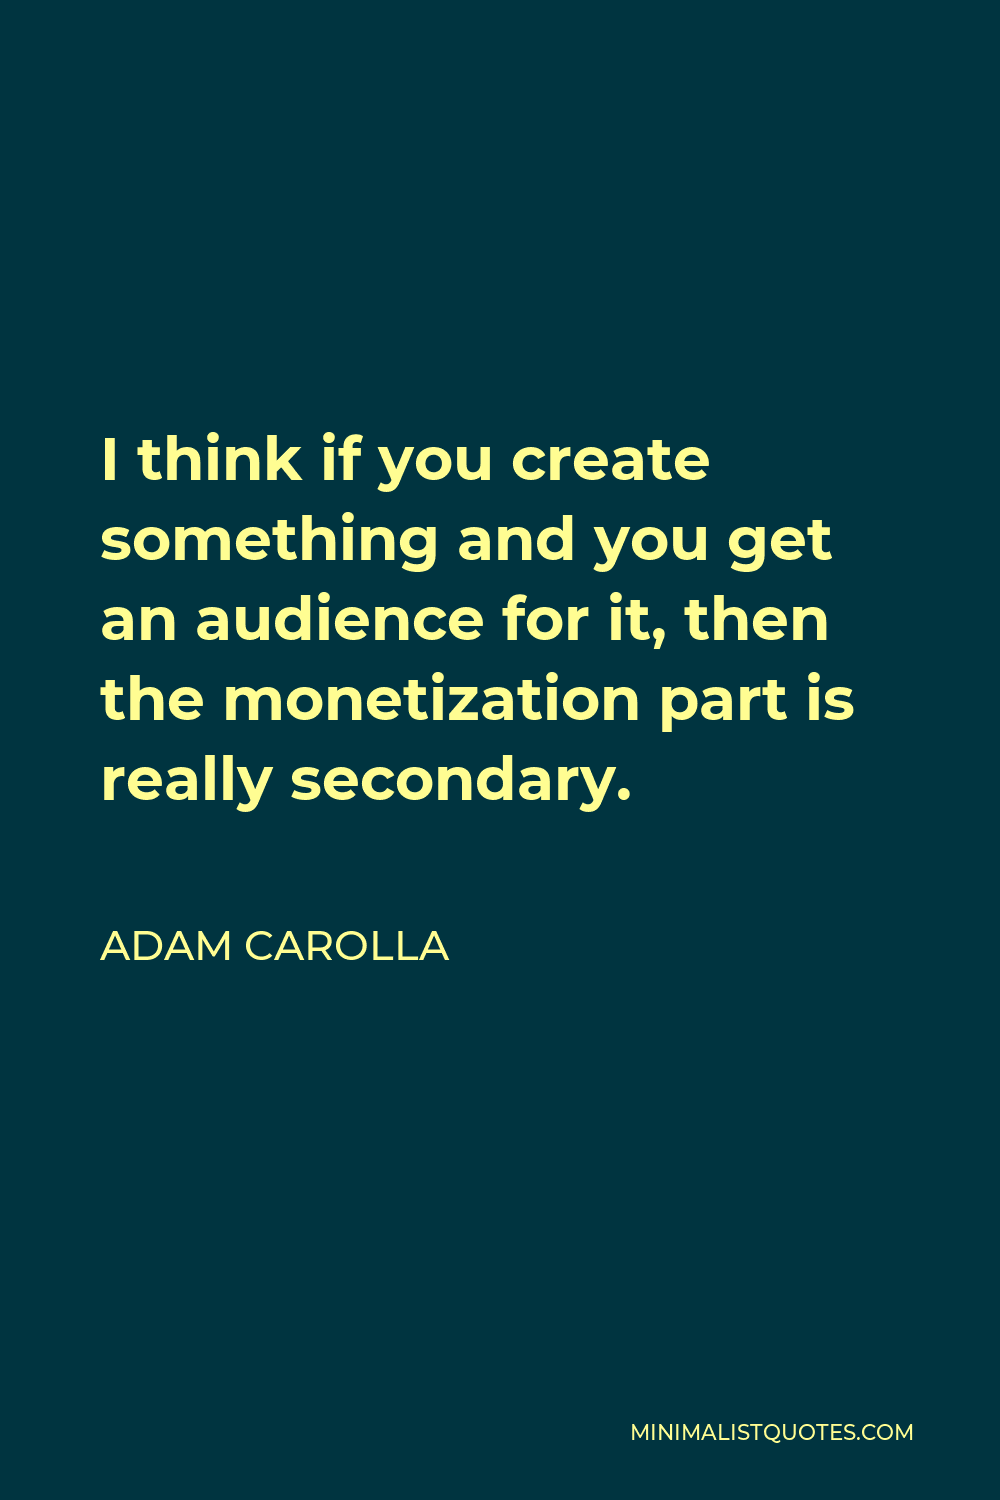 Adam Carolla Quote - I think if you create something and you get an audience for it, then the monetization part is really secondary.